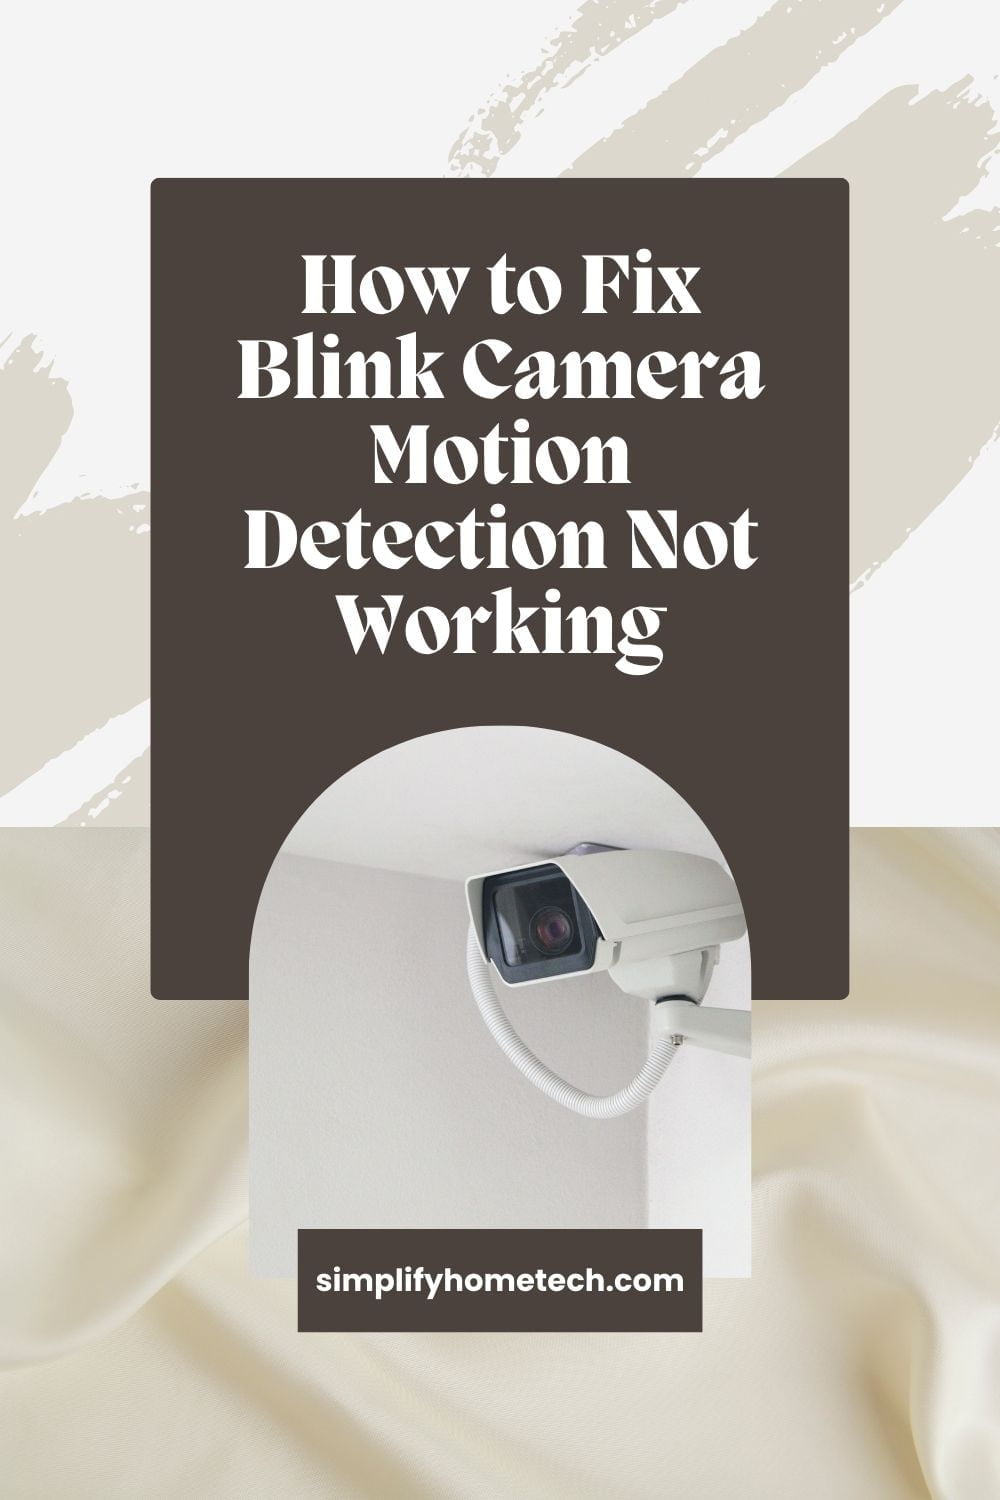 How to Fix Blink Camera Motion Detection Not Working